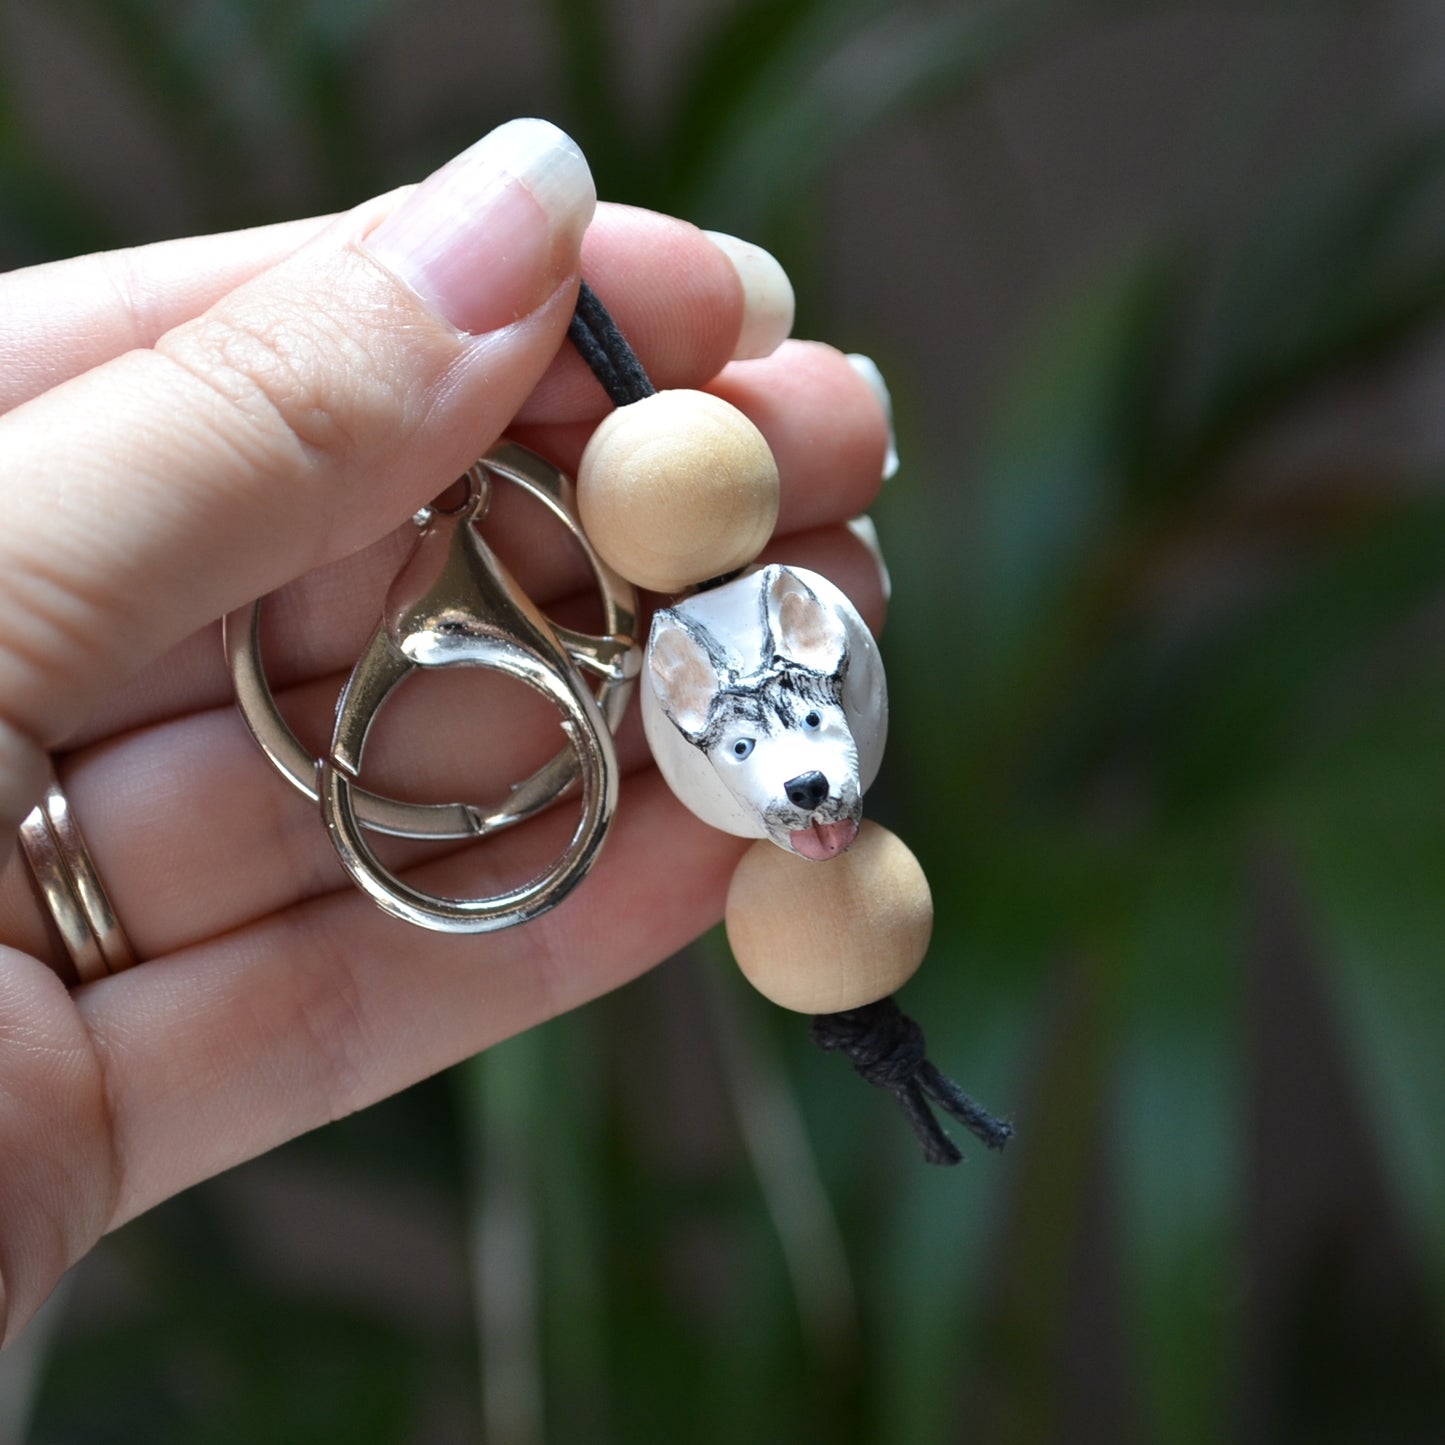 Handmade timber and polymer clay husky dog keychain being held in front of green palm plant background